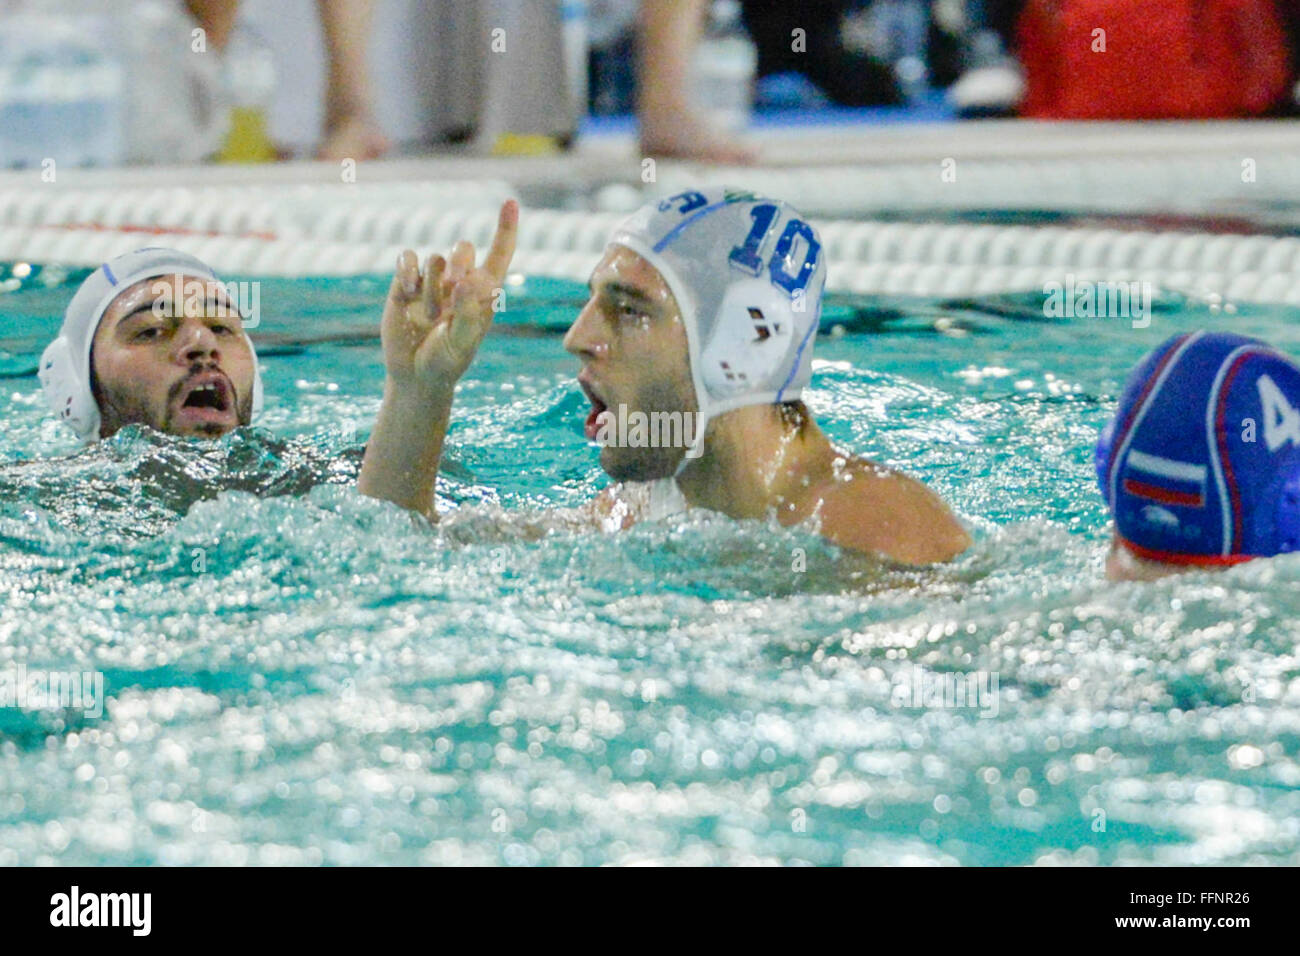 Turin, Italy. 16th February, 2016. Stefano Luongo of Italy celebrates goal  during the match between Russia and Italy  at the Waterpolo World Championships in Turin  Palazzo del Nuoto on Febraury 16, 2016 in Turin, Italy. Credit:  Stefano Guidi/Alamy Live News Stock Photo